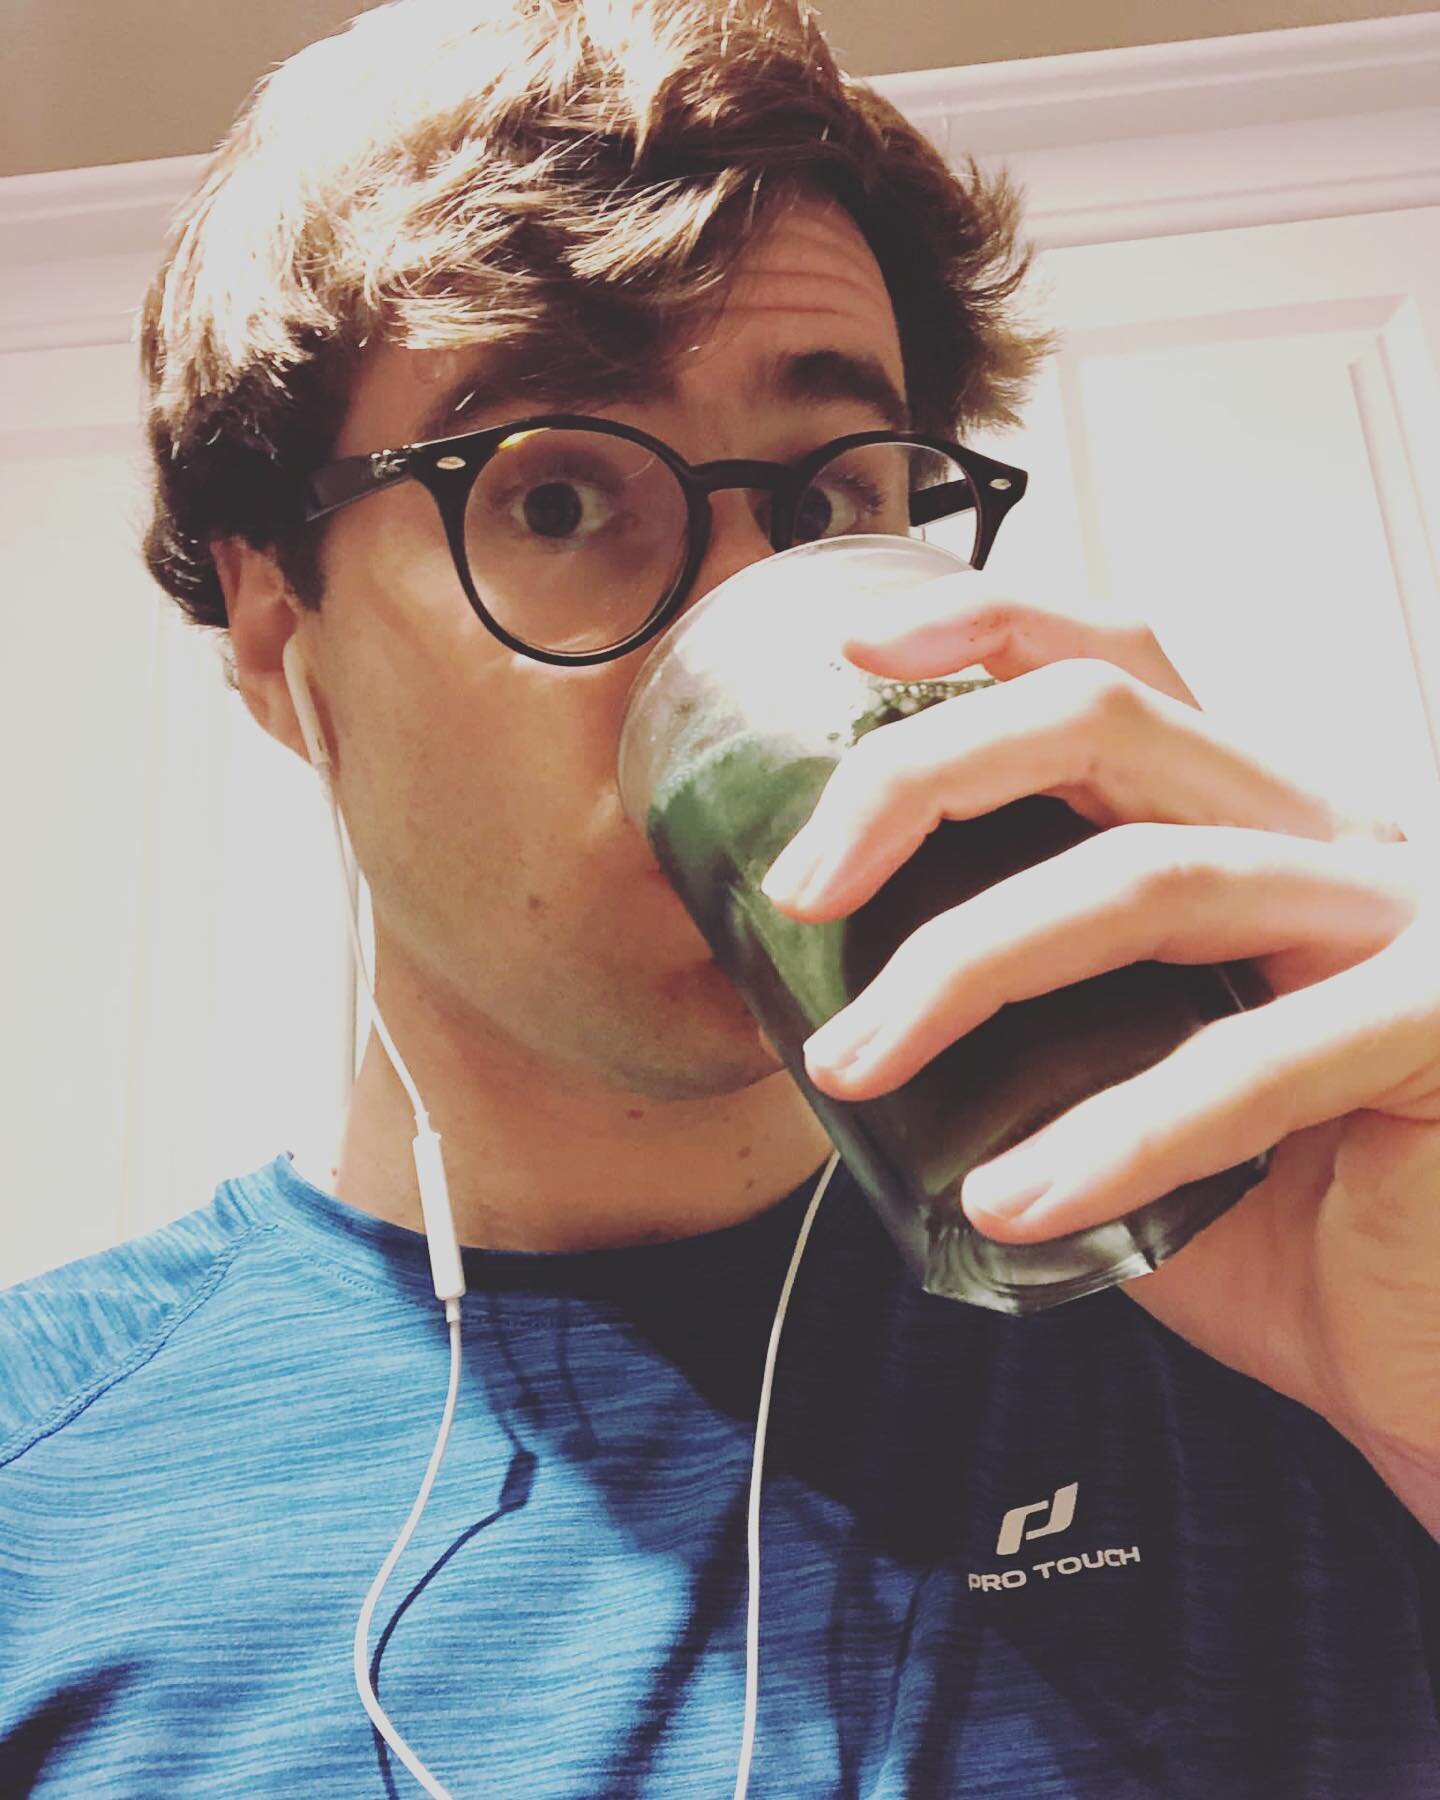 &ldquo;Greens Stack has helped in so many areas of life! Perhaps most notably, my distance running (which had previously plateaued) is improving every single session, once again. FINALLY&rdquo;

Hence, we formulated Greens Stack. 

You take care of y